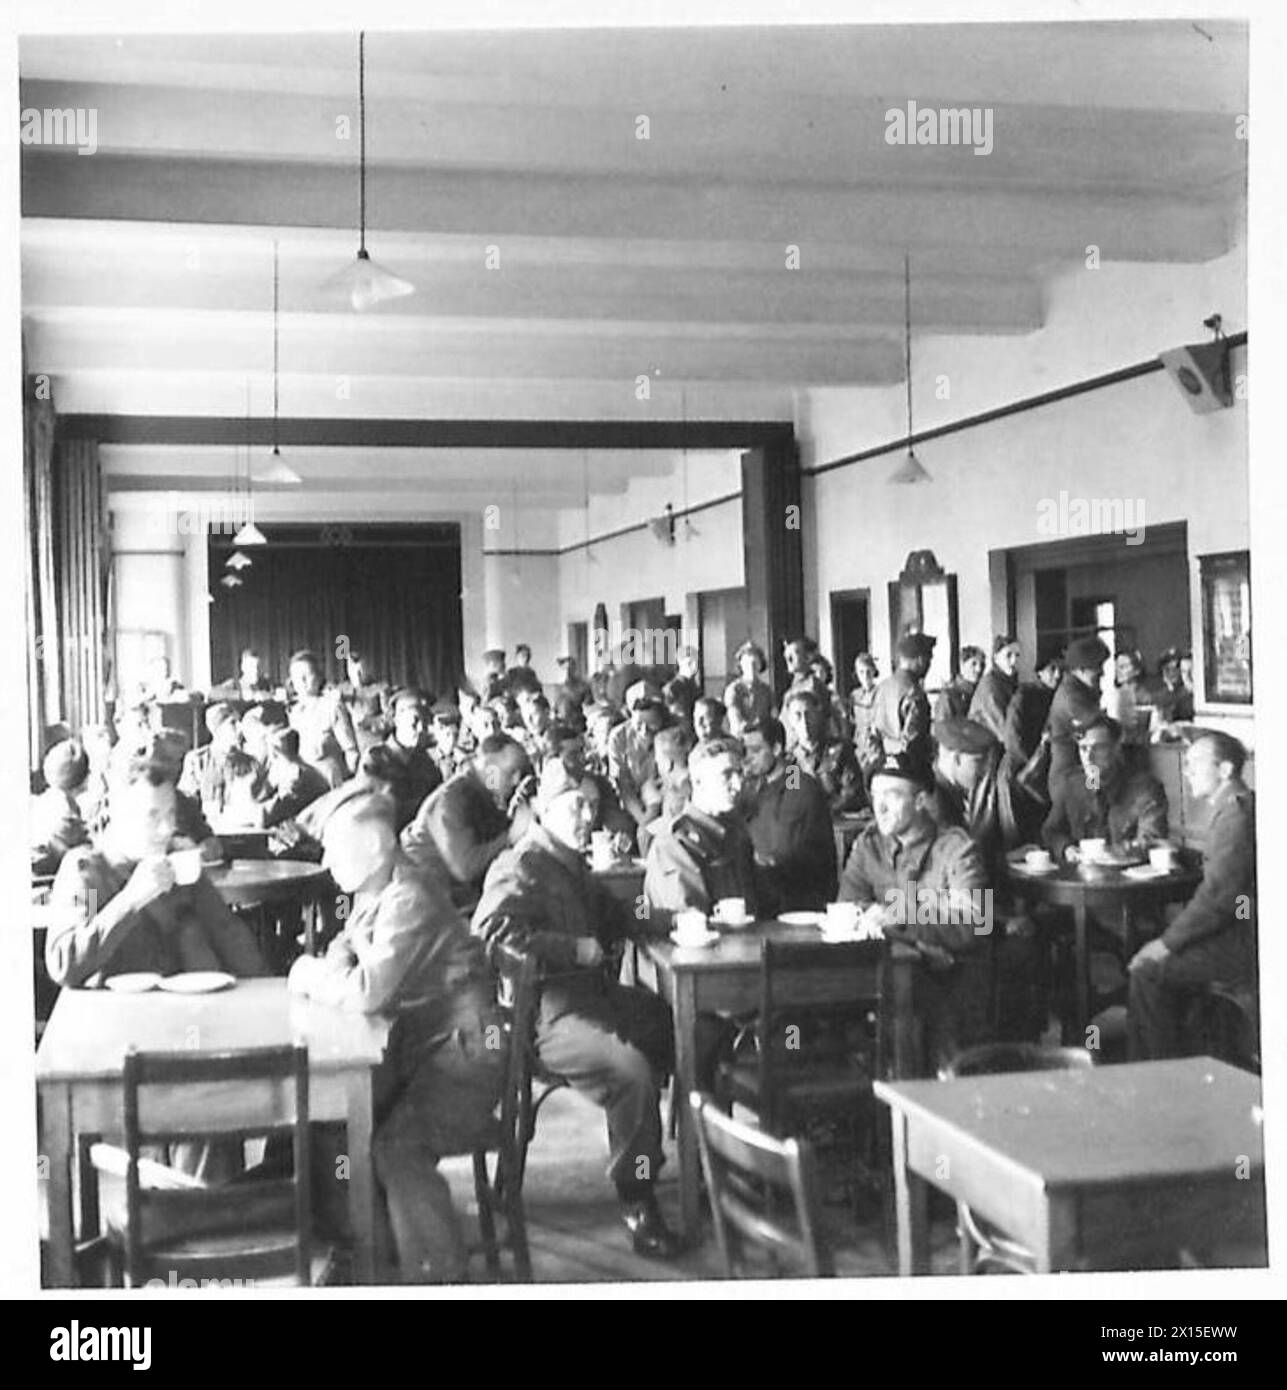 ARMY SCHOOL OF HYGIENE - Interior view of the NAAFI Hall, showing men seated at tables British Army Stock Photo